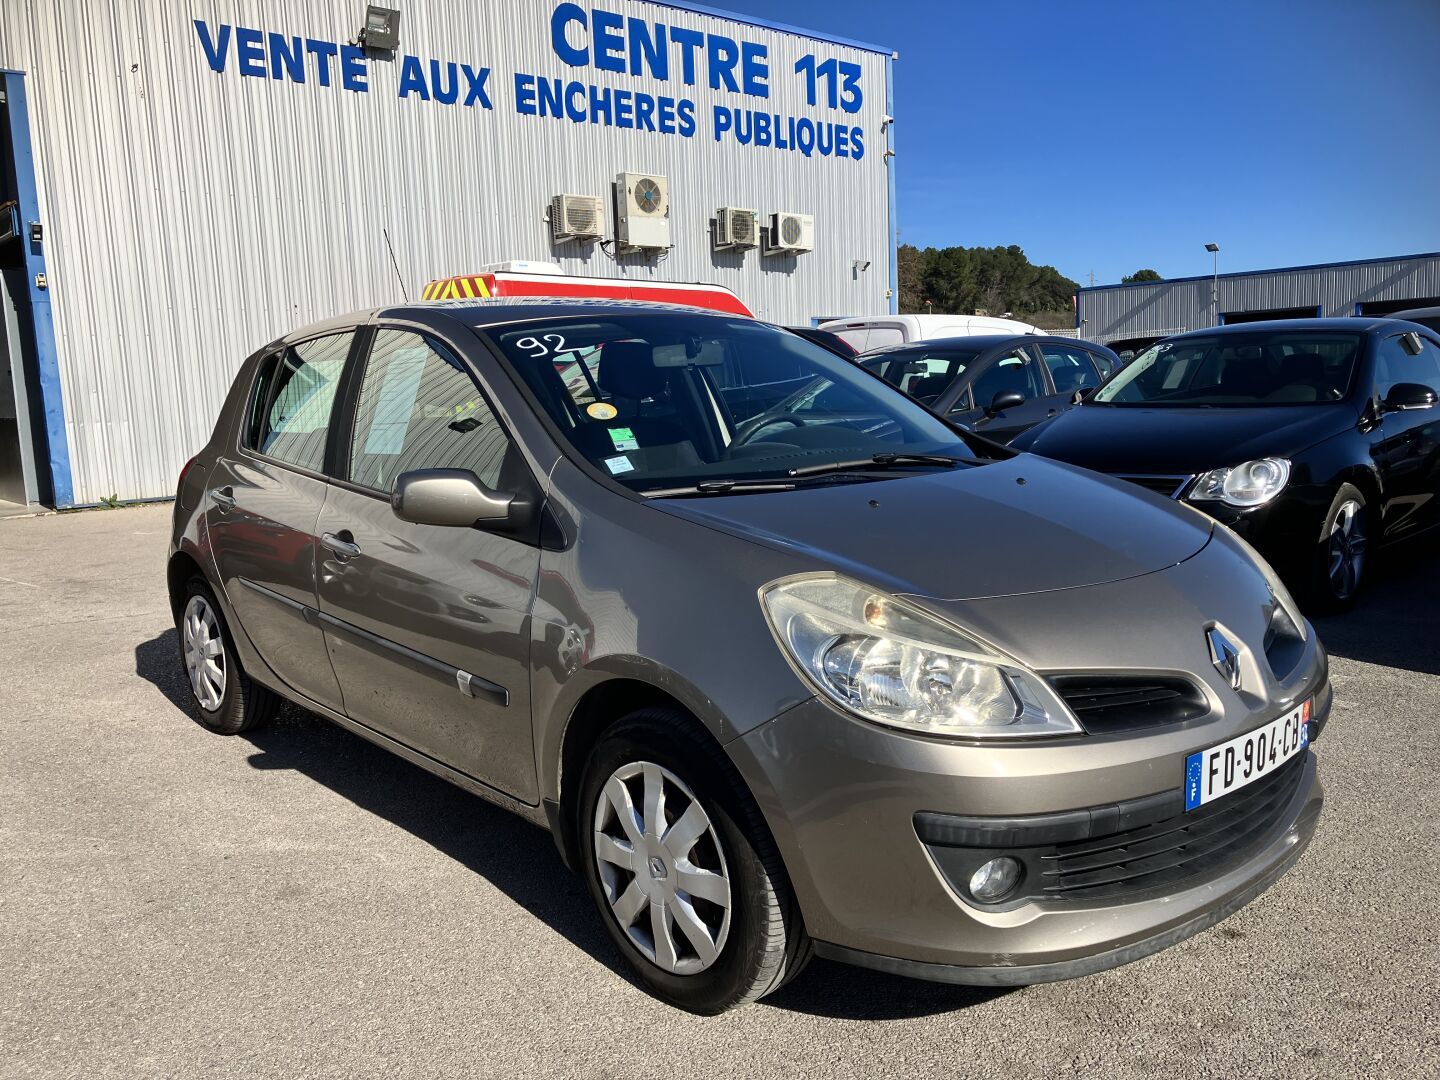 Null CLIO 3 1.5 DCI 68 CH
VP RENAULT CLIO 3 1.5 DCI 68 CH 1.5 DCI
Carrosserie : &hellip;